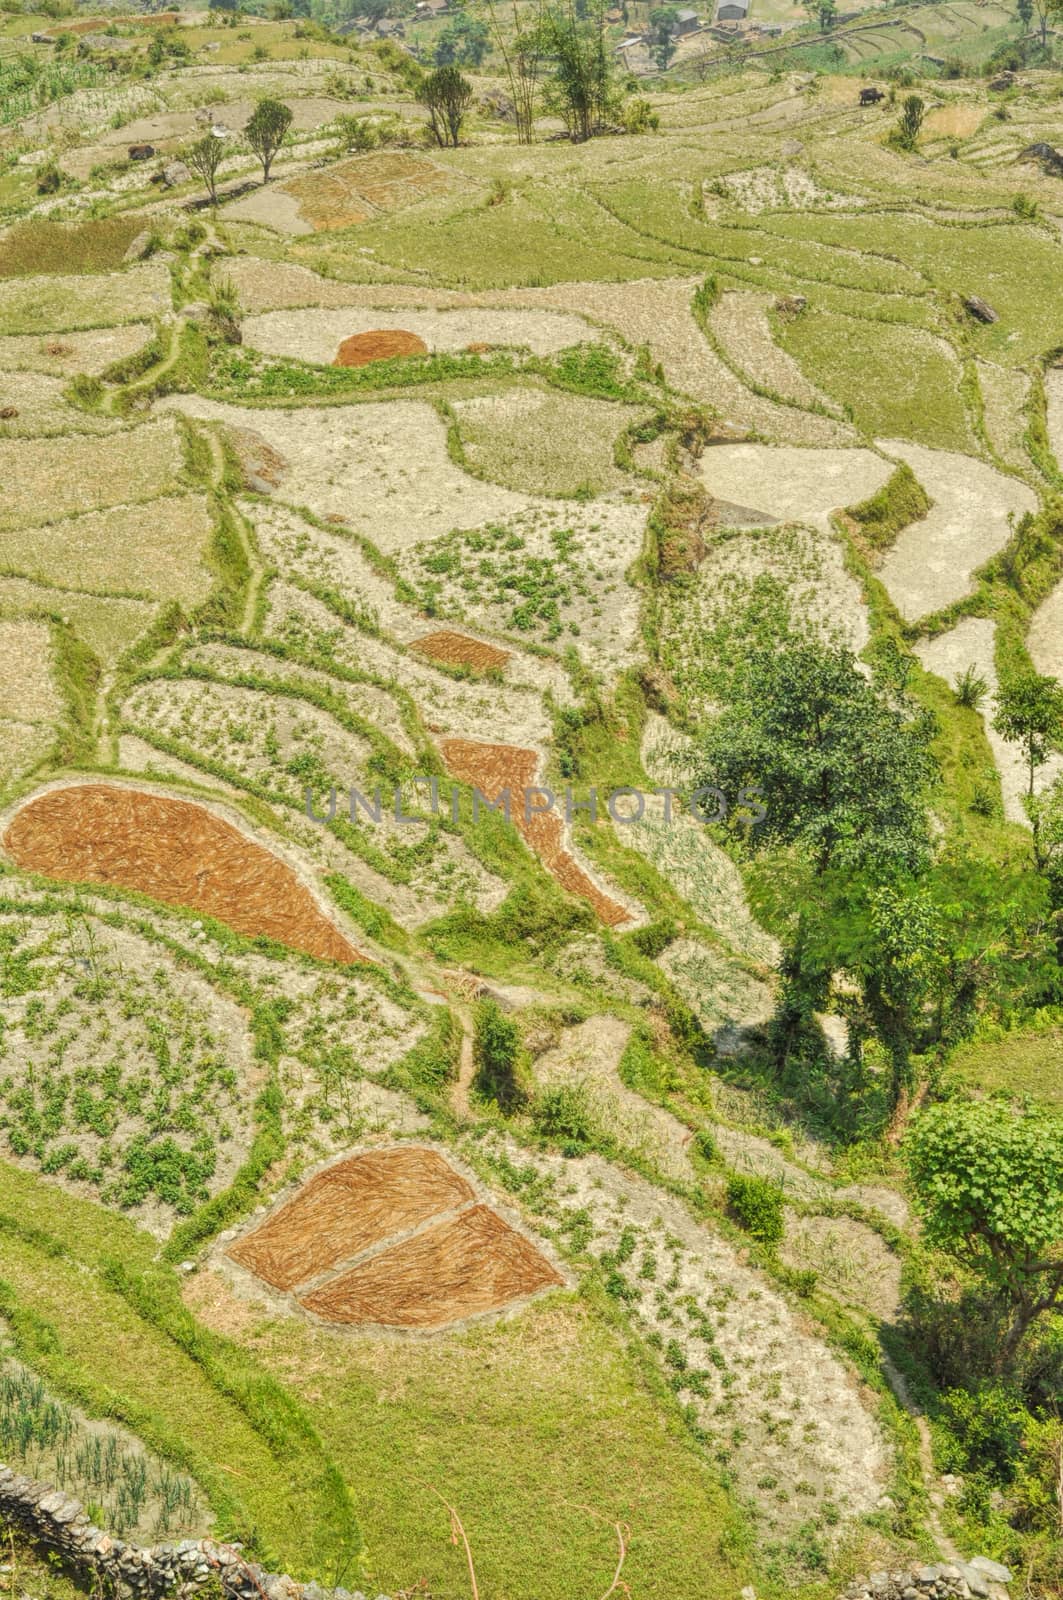 Scenic aerial view of terraced fields in Nepal